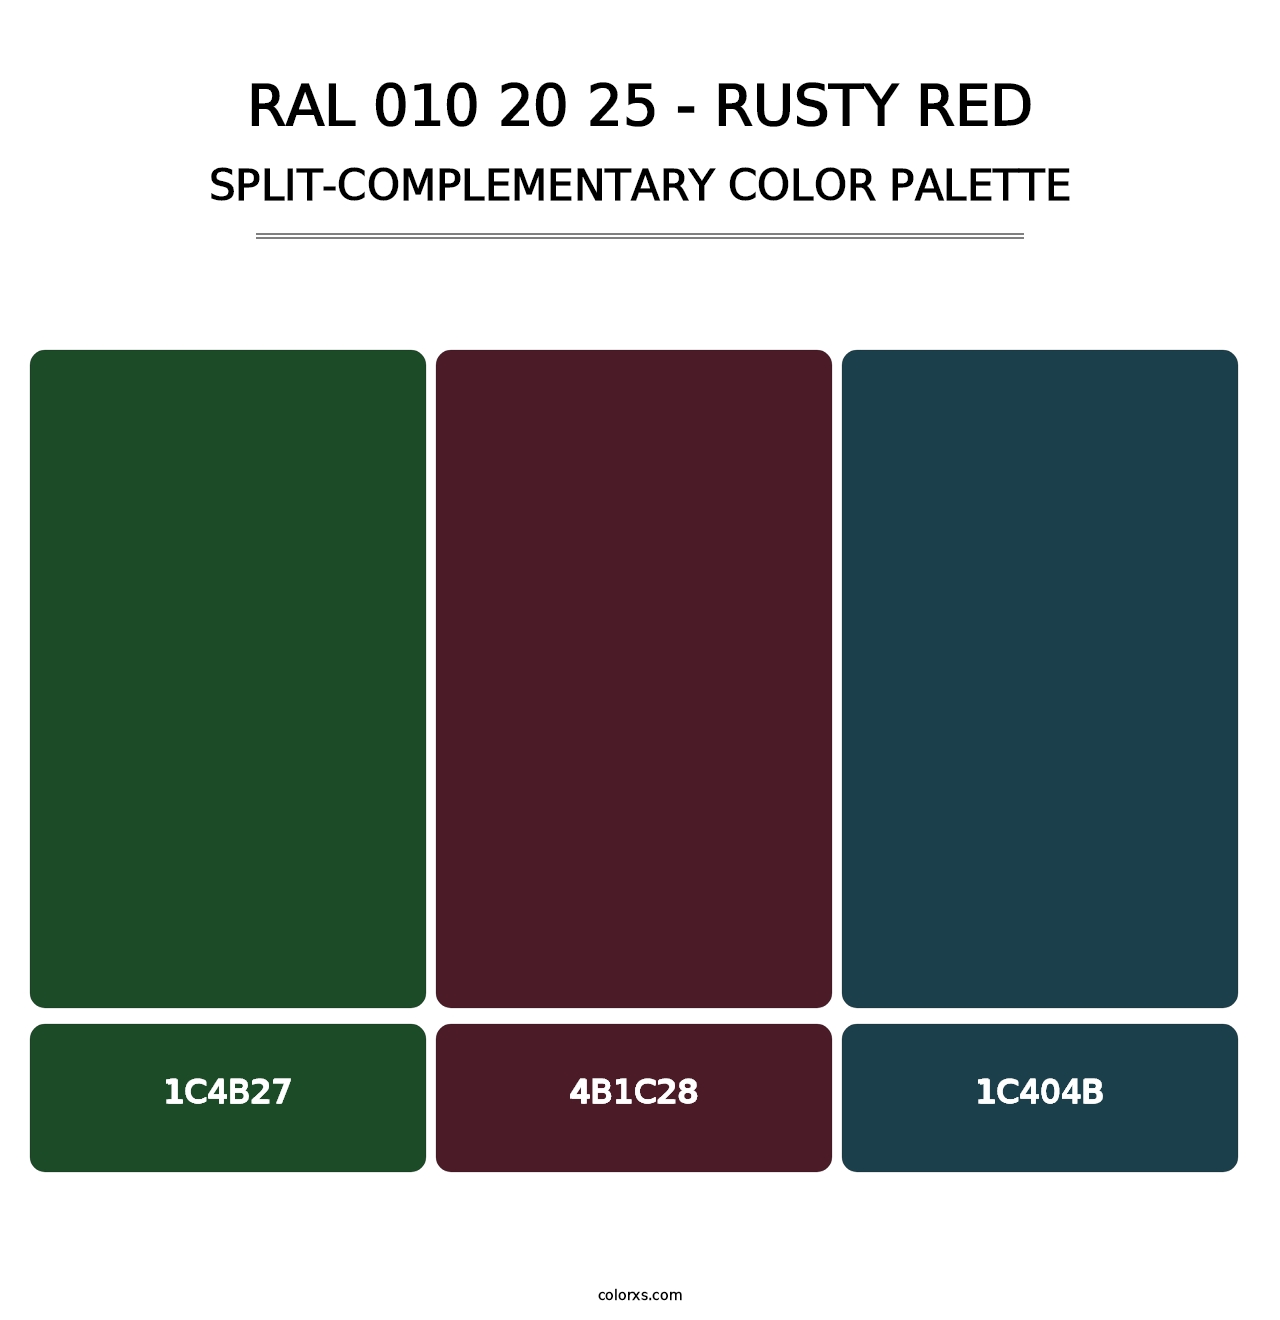 RAL 010 20 25 - Rusty Red - Split-Complementary Color Palette